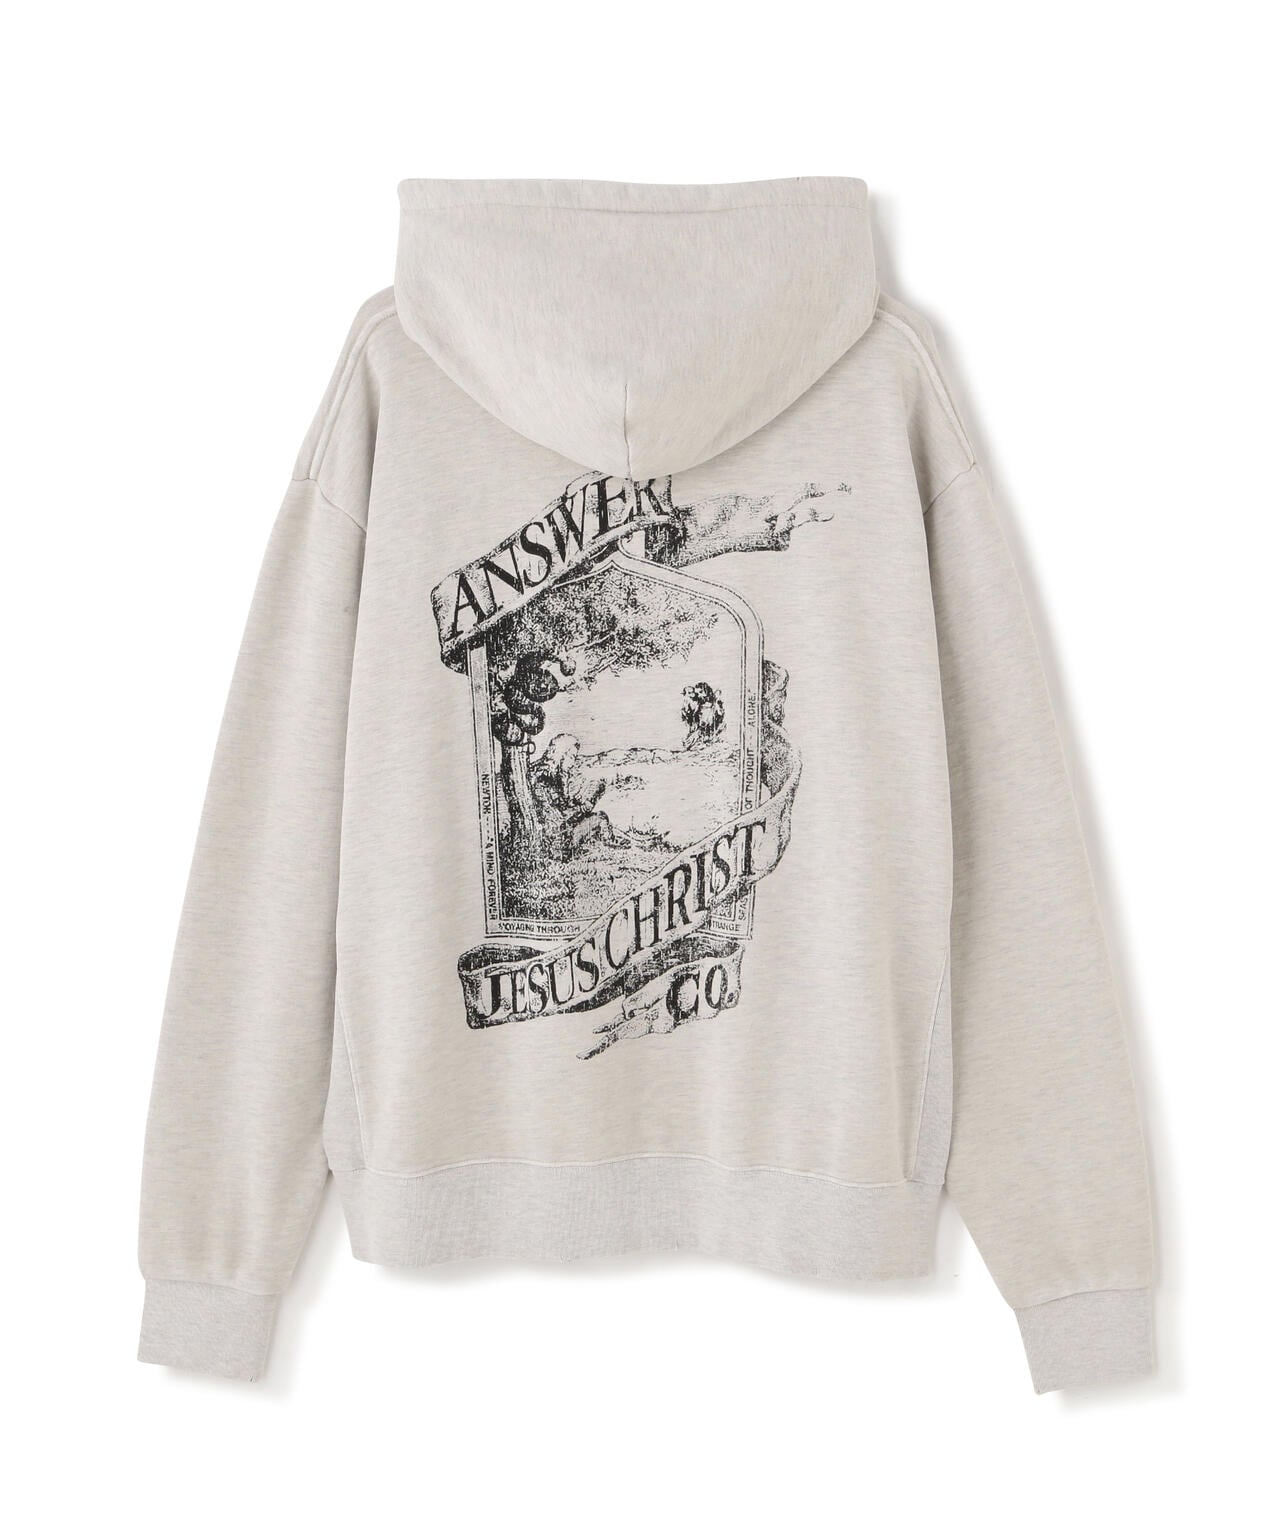 SOMEIT/サミット/O.S VINTAGE HOODIE/ヴィンテージパーカー | LHP